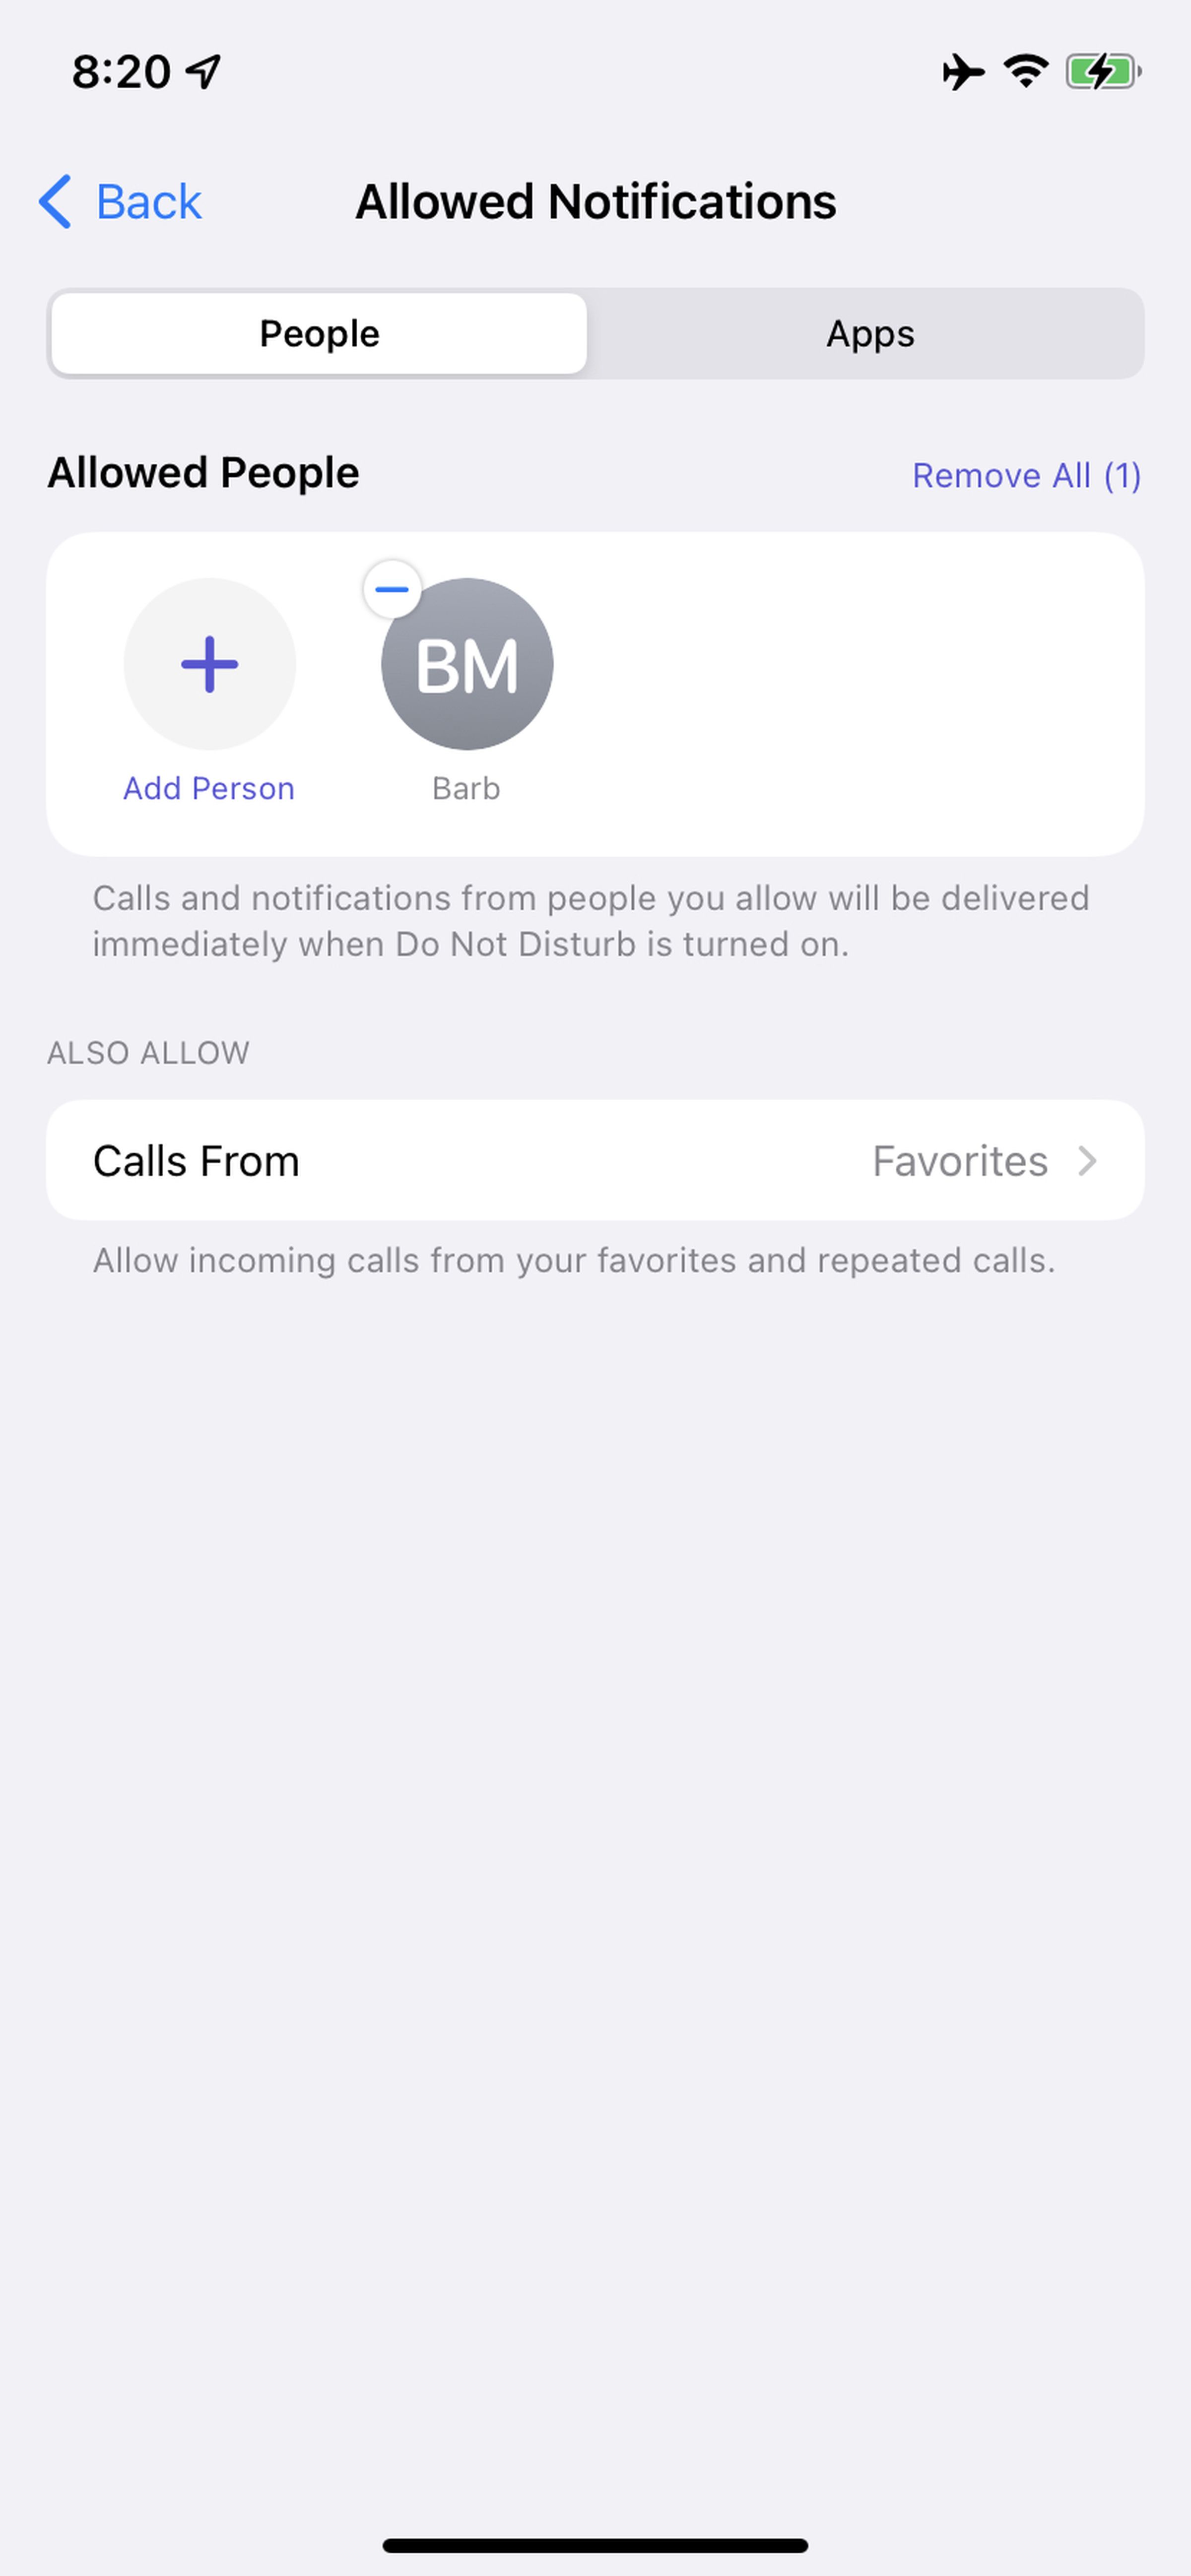 You can also select which people can still contact you.